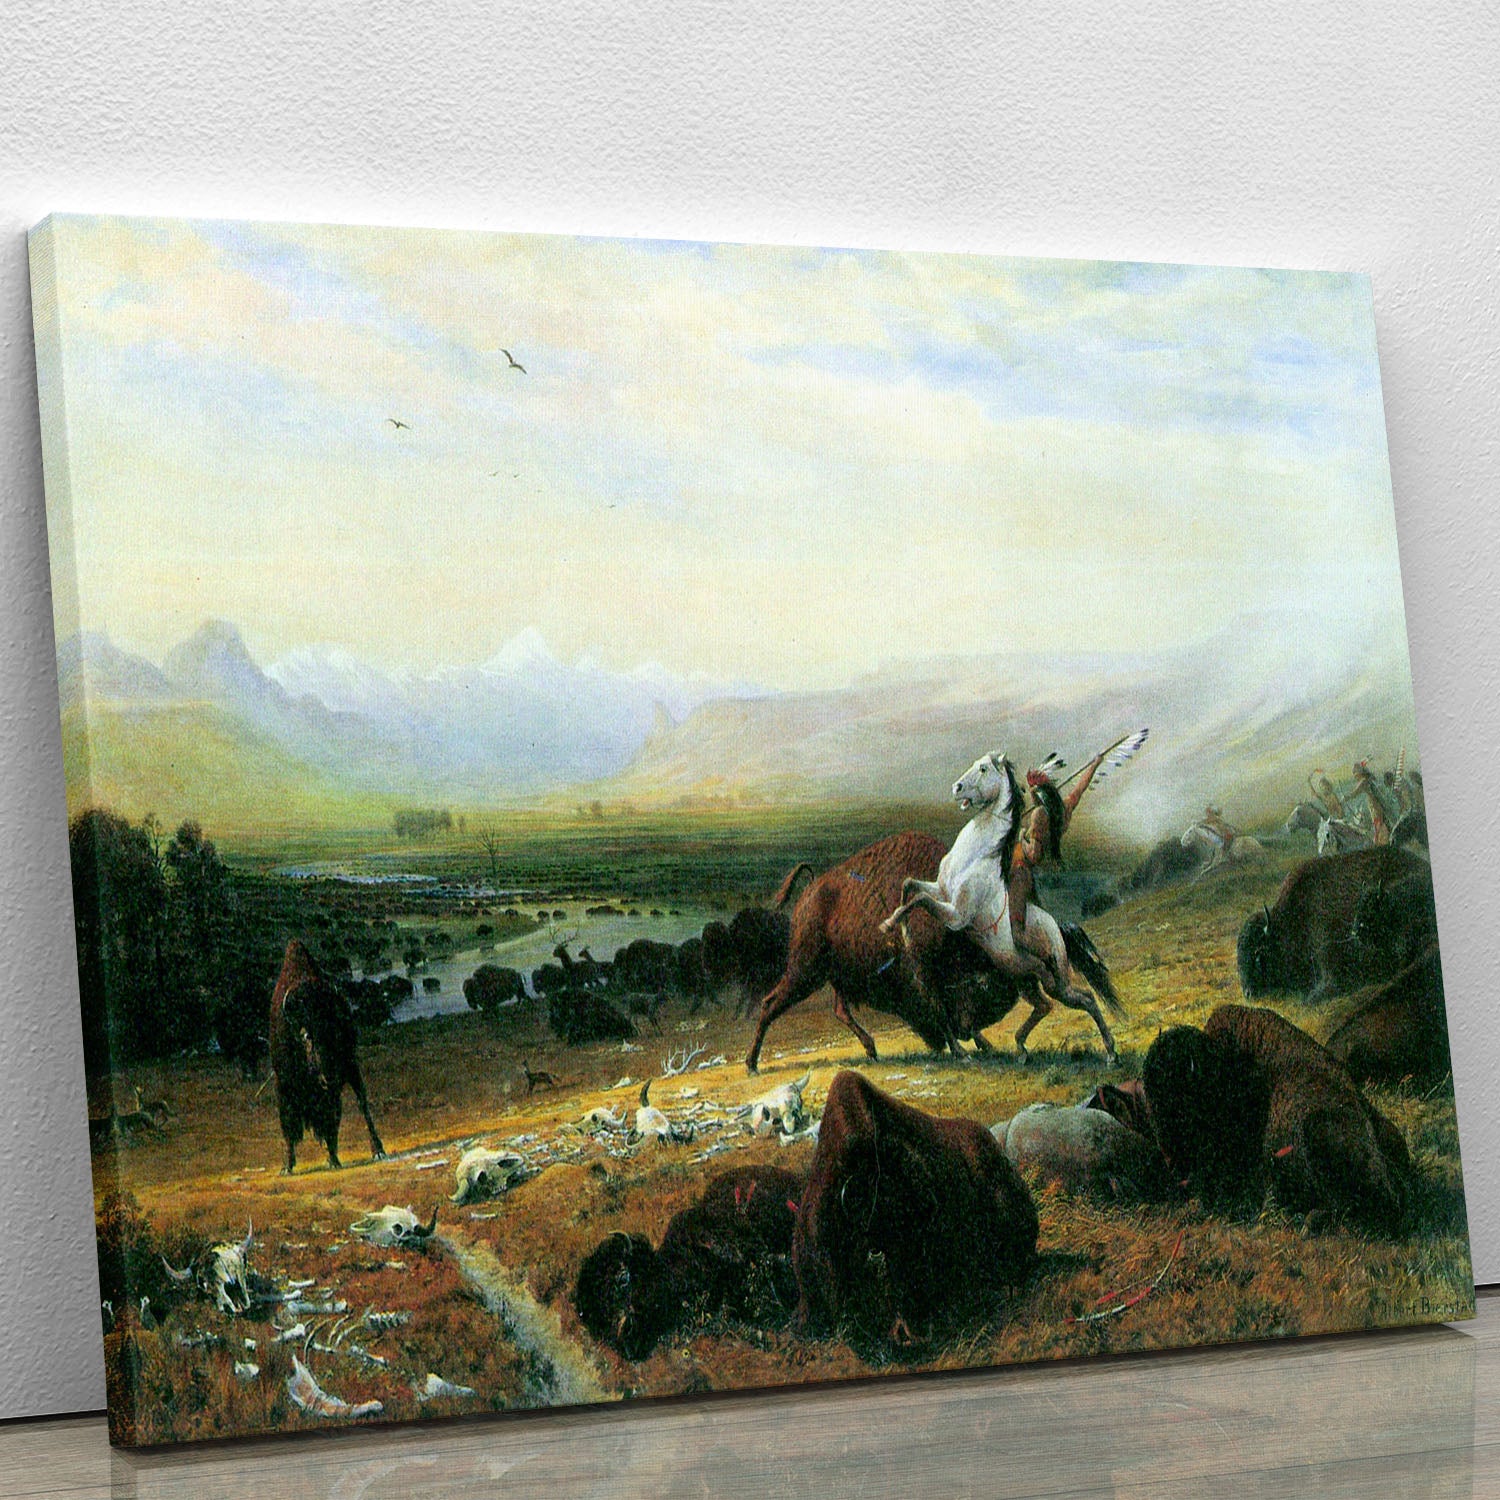 The last Buffalo by Bierstadt Canvas Print or Poster - Canvas Art Rocks - 1